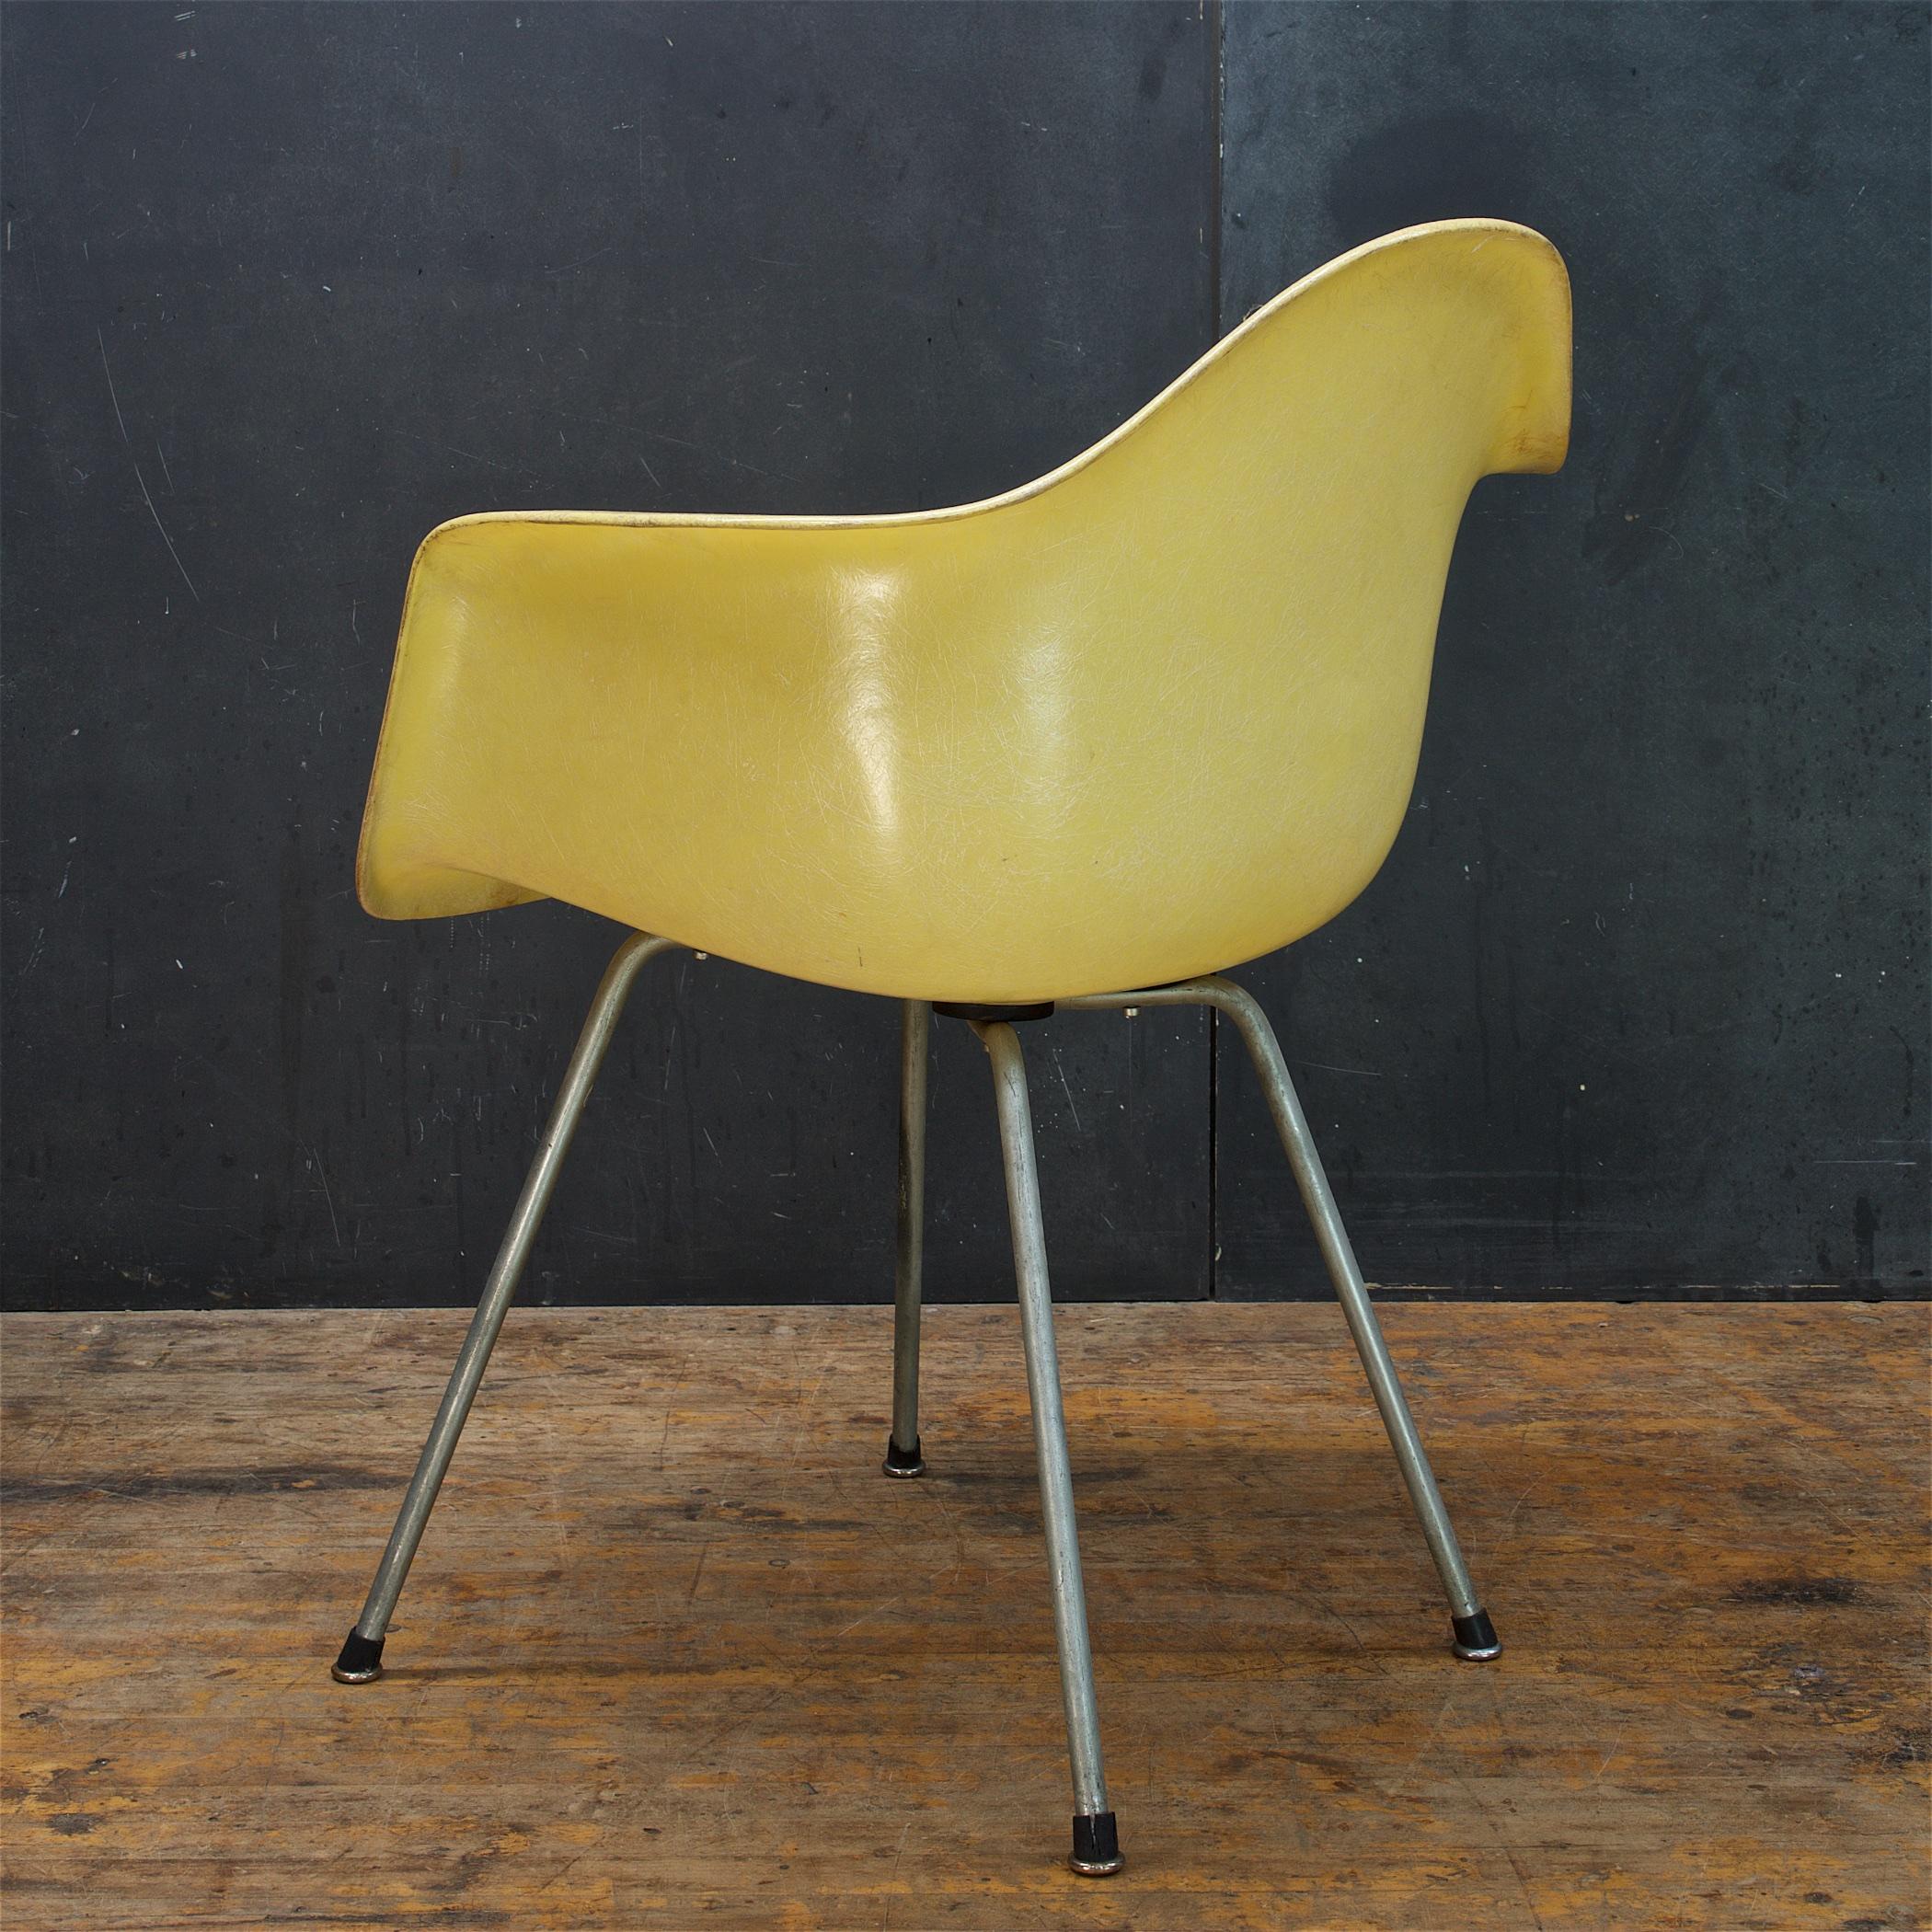 Mid-Century Modern Vintage 1950s Lemon Yellow DAX Chair Charles+Ray Eames Zenith Herman Miller For Sale